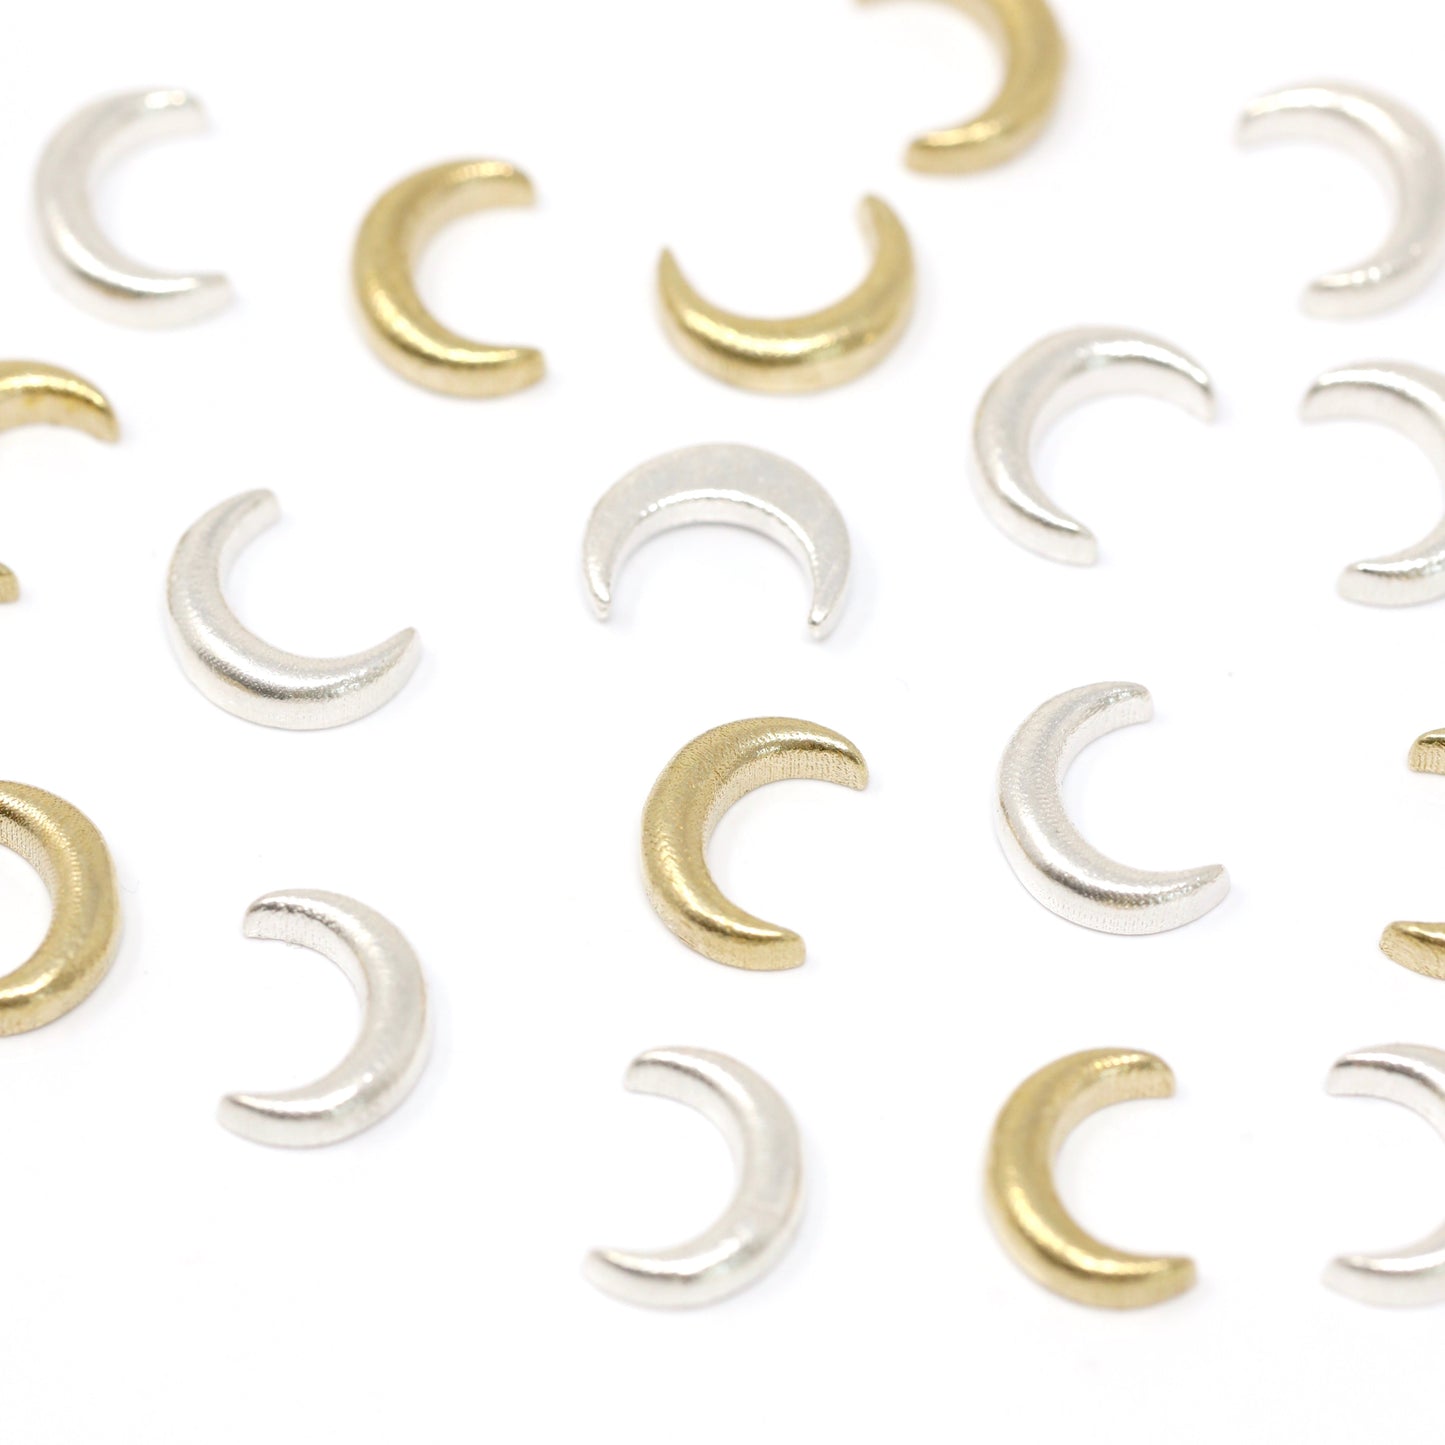 Big Crescent Moon Accent Charm Embellishments for Soldering or Jewelry Making